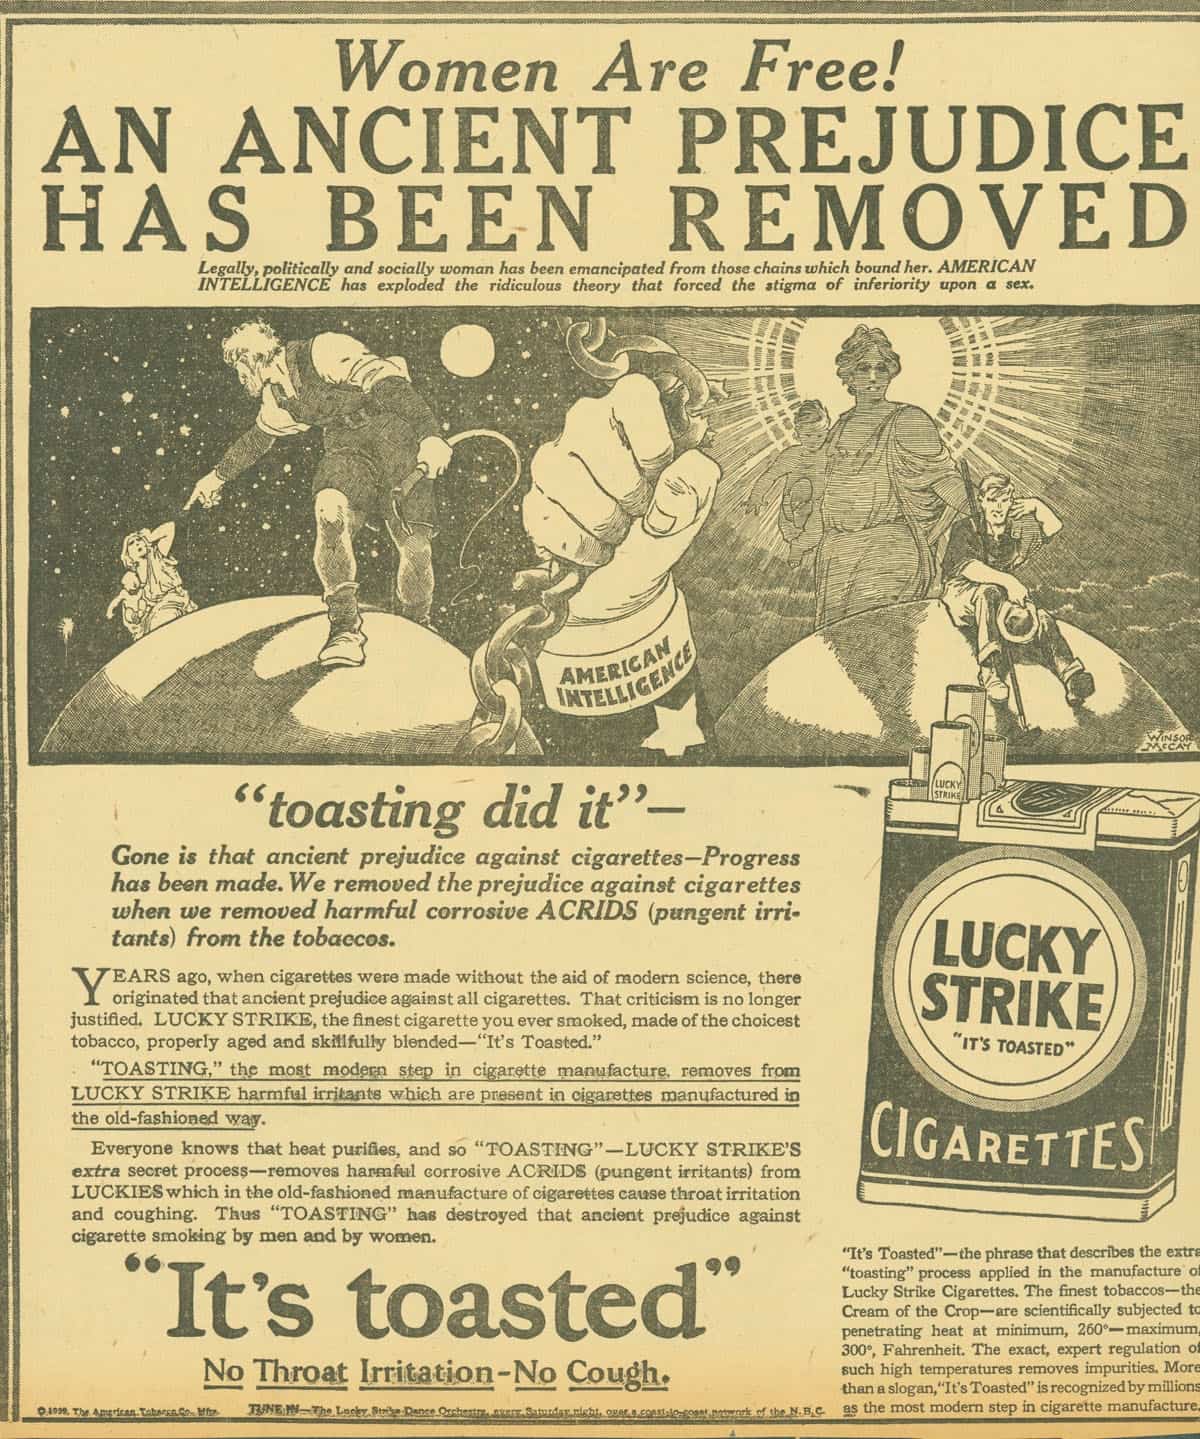 A 1929 ad for Lucky Strike cigarettes capitalizing on the women's liberation movement. <span class="figure--credit">Source: <a href="https://tobacco.stanford.edu/cigarettes/targeting-women/mass-marketing-begins/#collection-21">Stanford Research Into the Impact of Tobacco Advertising<a></a></a></span>